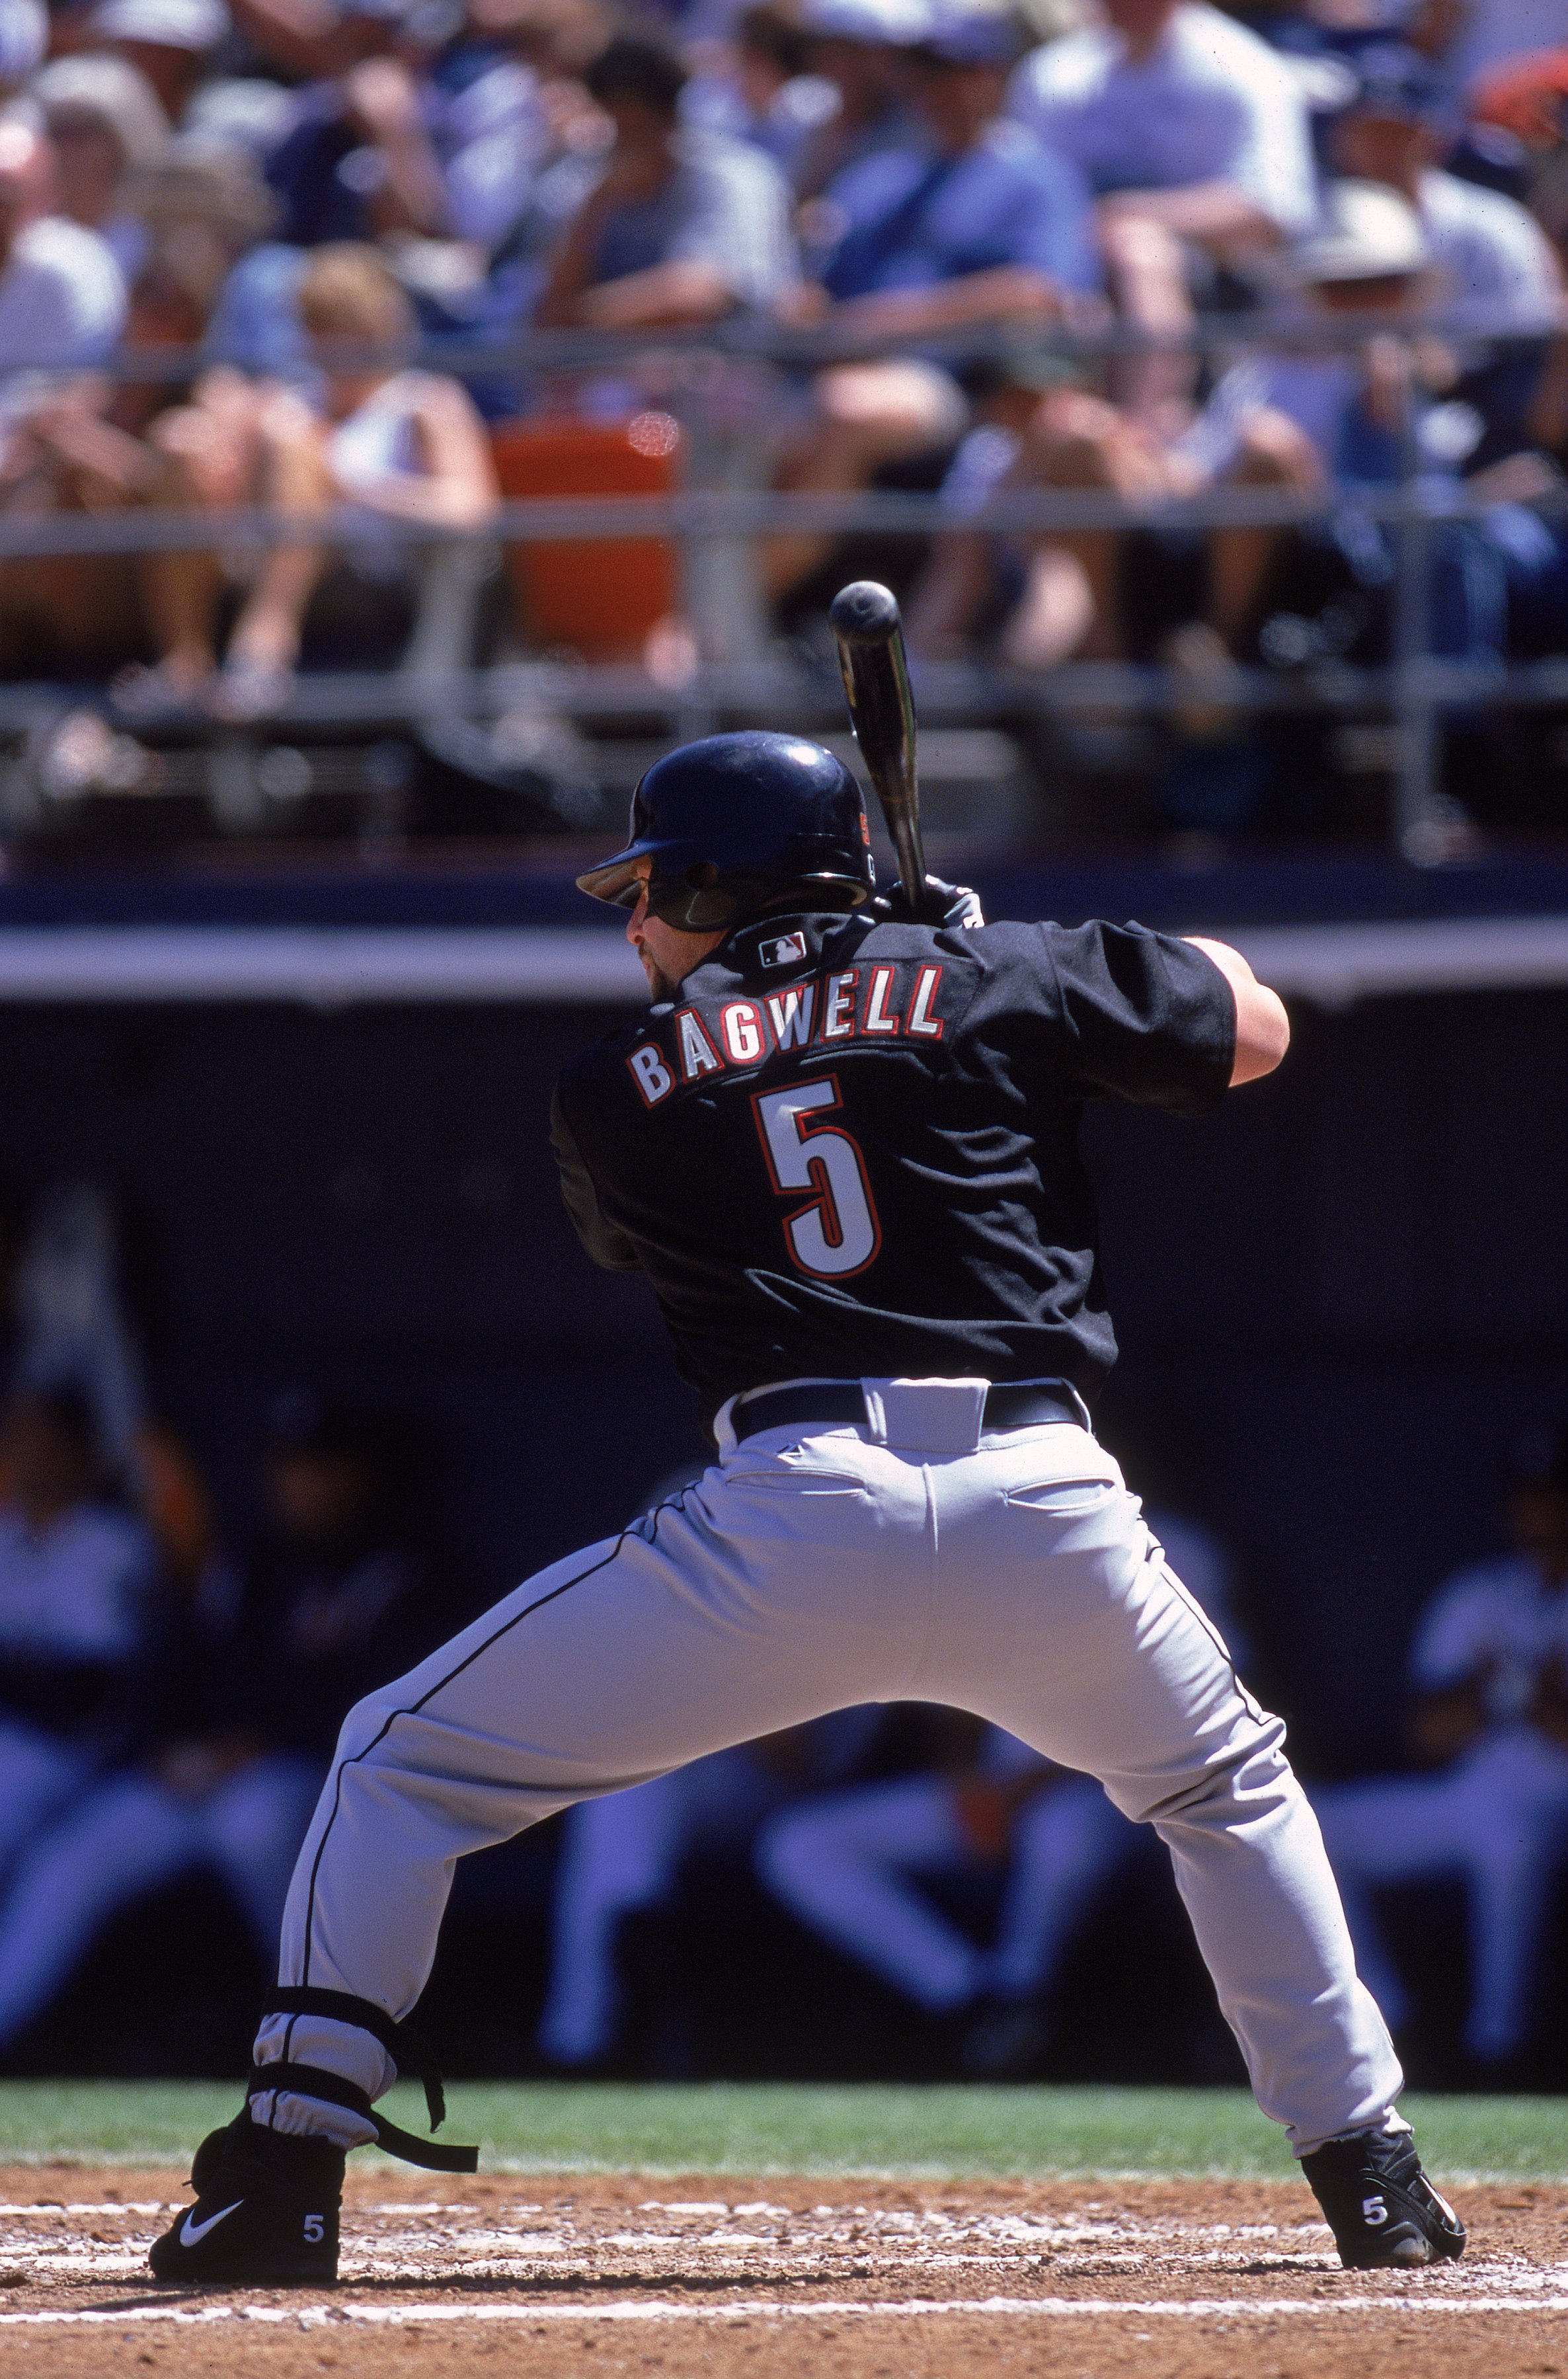 16 Apr 2000: Jeff Bagwell #5 of the Houston Astros stands ready at bat during a game against the San Diego Padres at the Qualcomm Stadium in San Diego, California. The Padres defeated the Astros 13-3. Mandatory Credit: Stephen Dunn  /Allsport